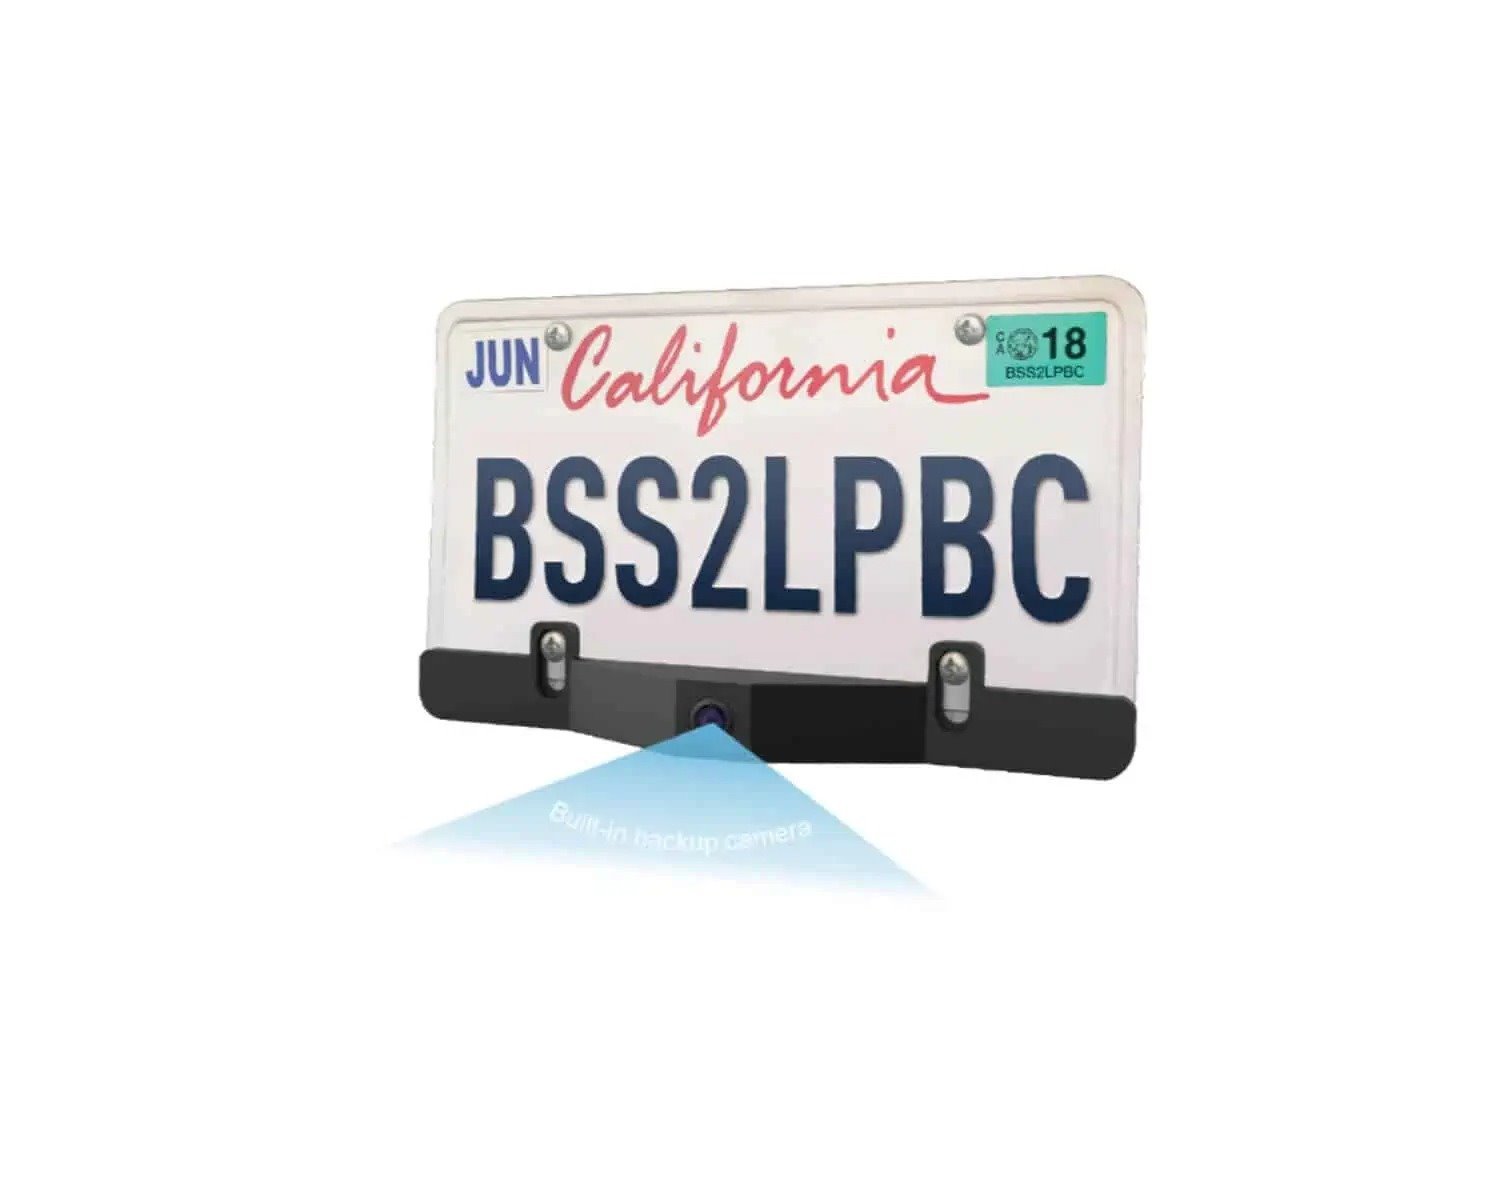 BSS2LPBC Advanced License Plate Bar Blindspot Detection System, For All Types Of Vehicles: (Trucks, Cars, Commercial Vehicles)